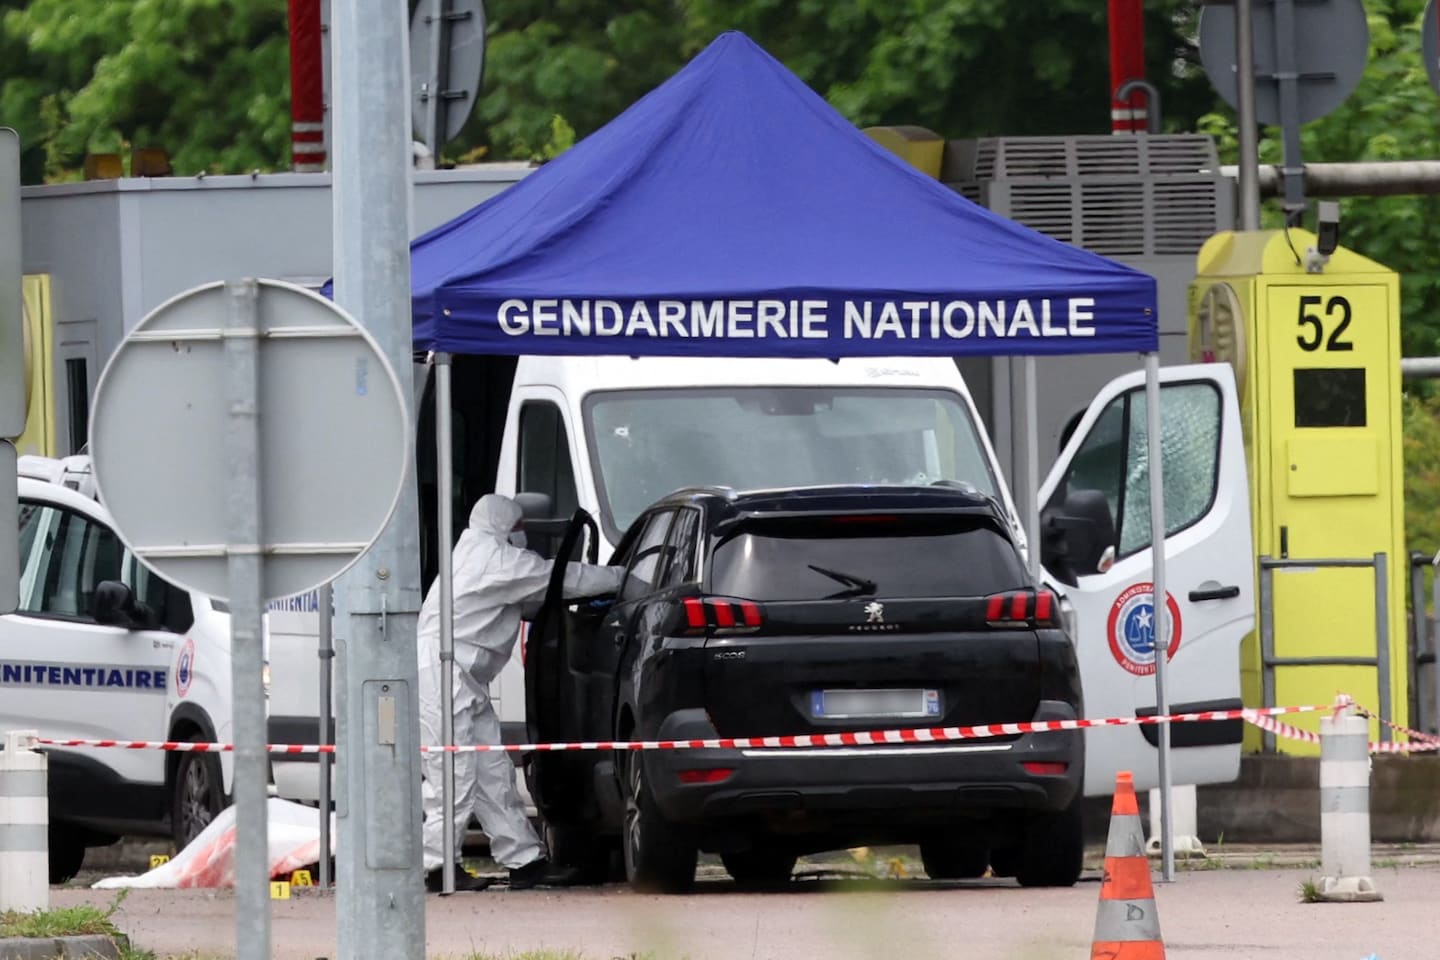 Manhunt on for convict freed in deadly attack on prison convoy in France